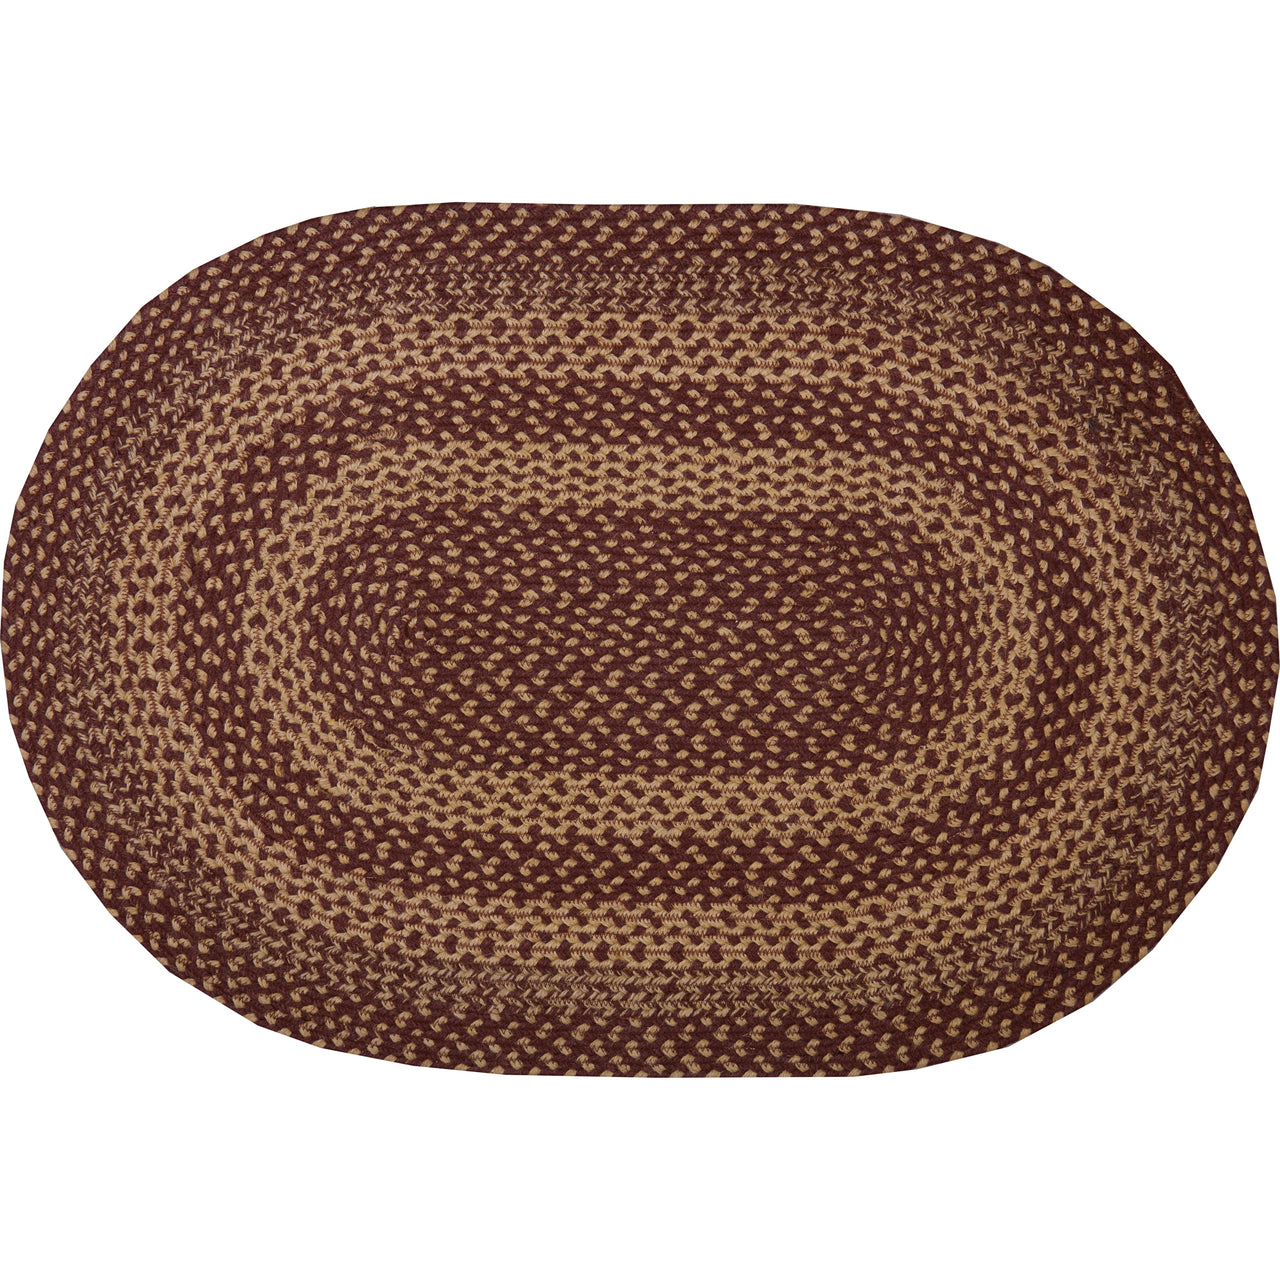 Burgundy Tan Jute Braided Rug Oval 24"x36" (2'x3') with Rug Pad VHC Brands